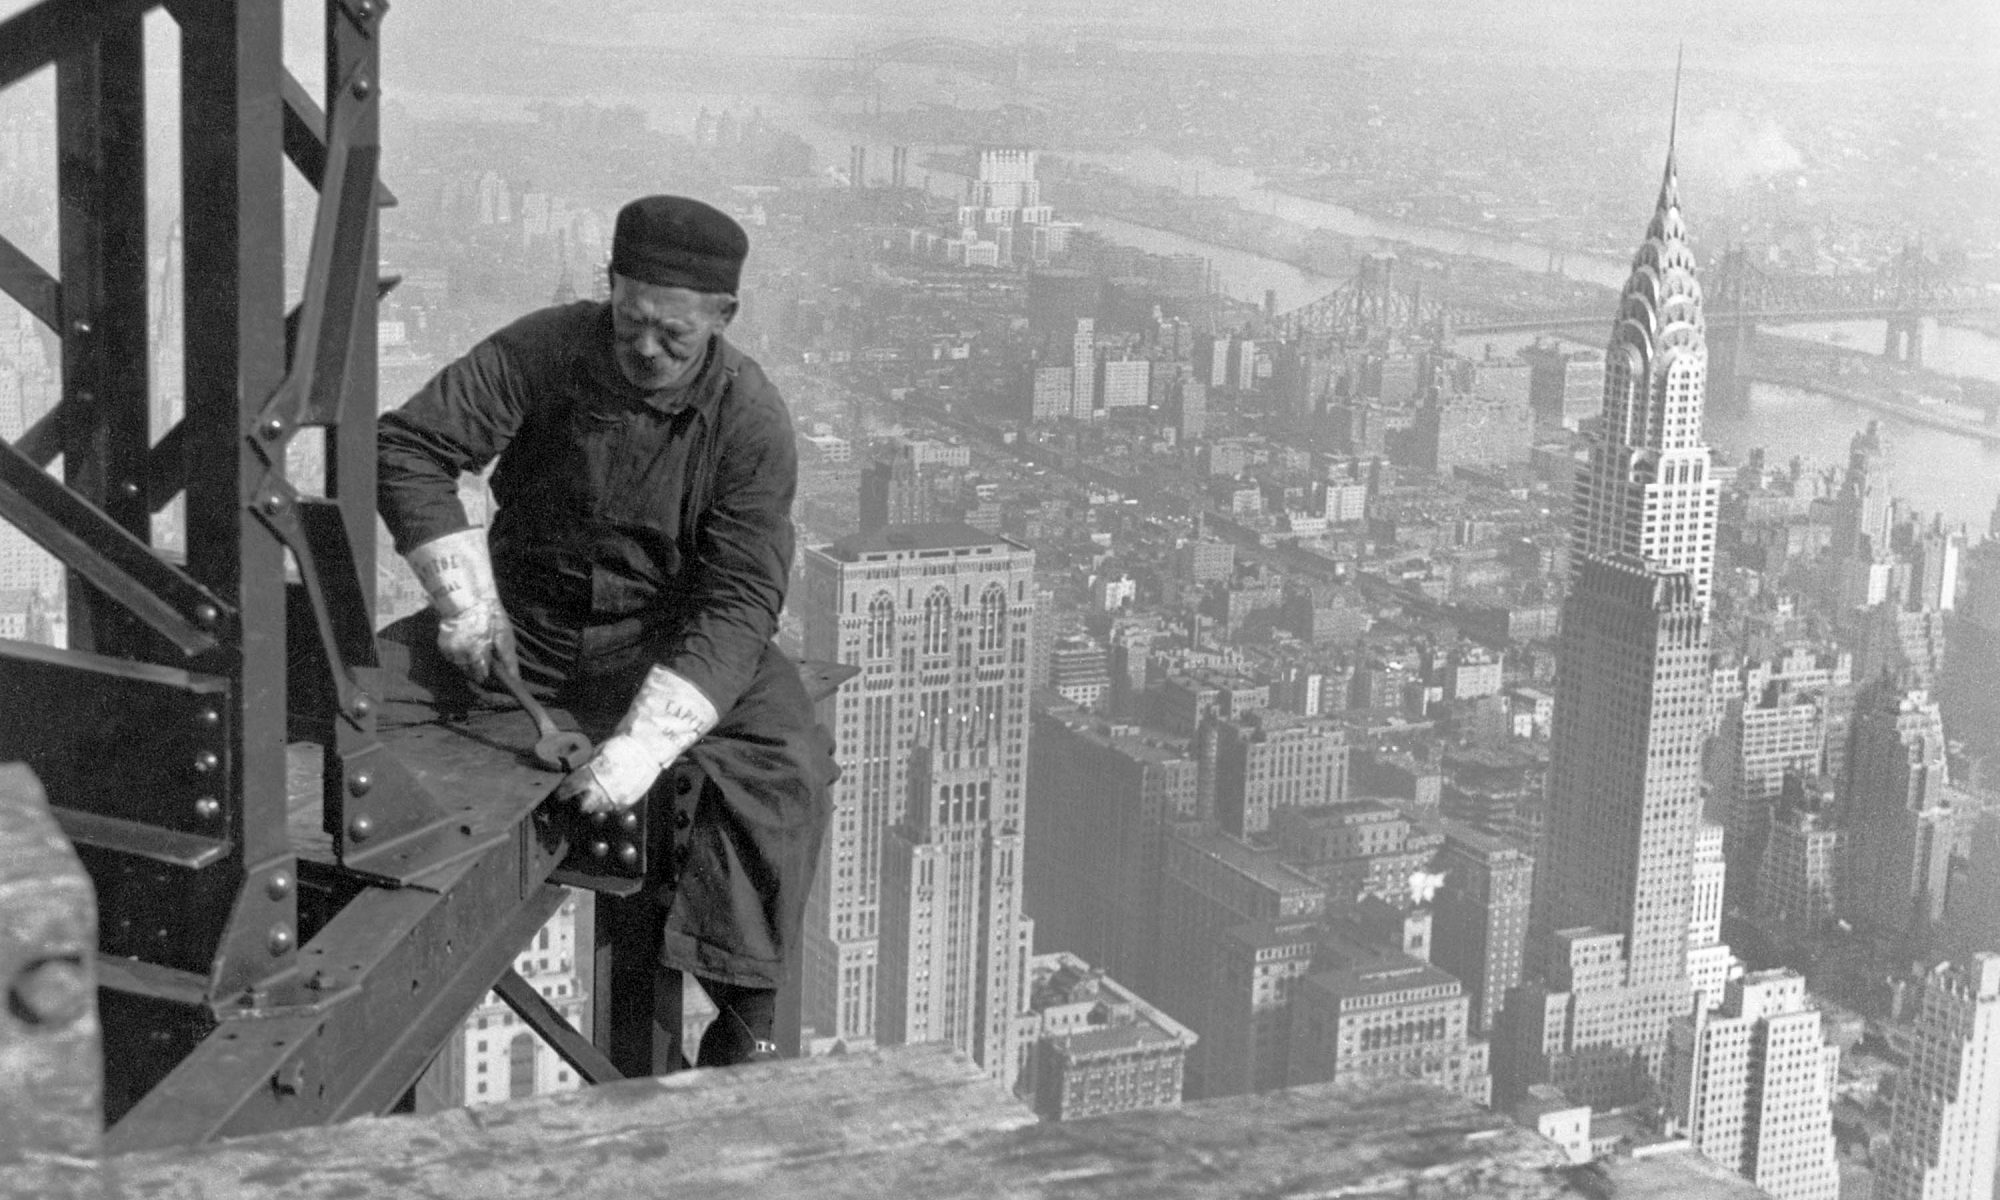 A black and white image of a man working on a building in New York city